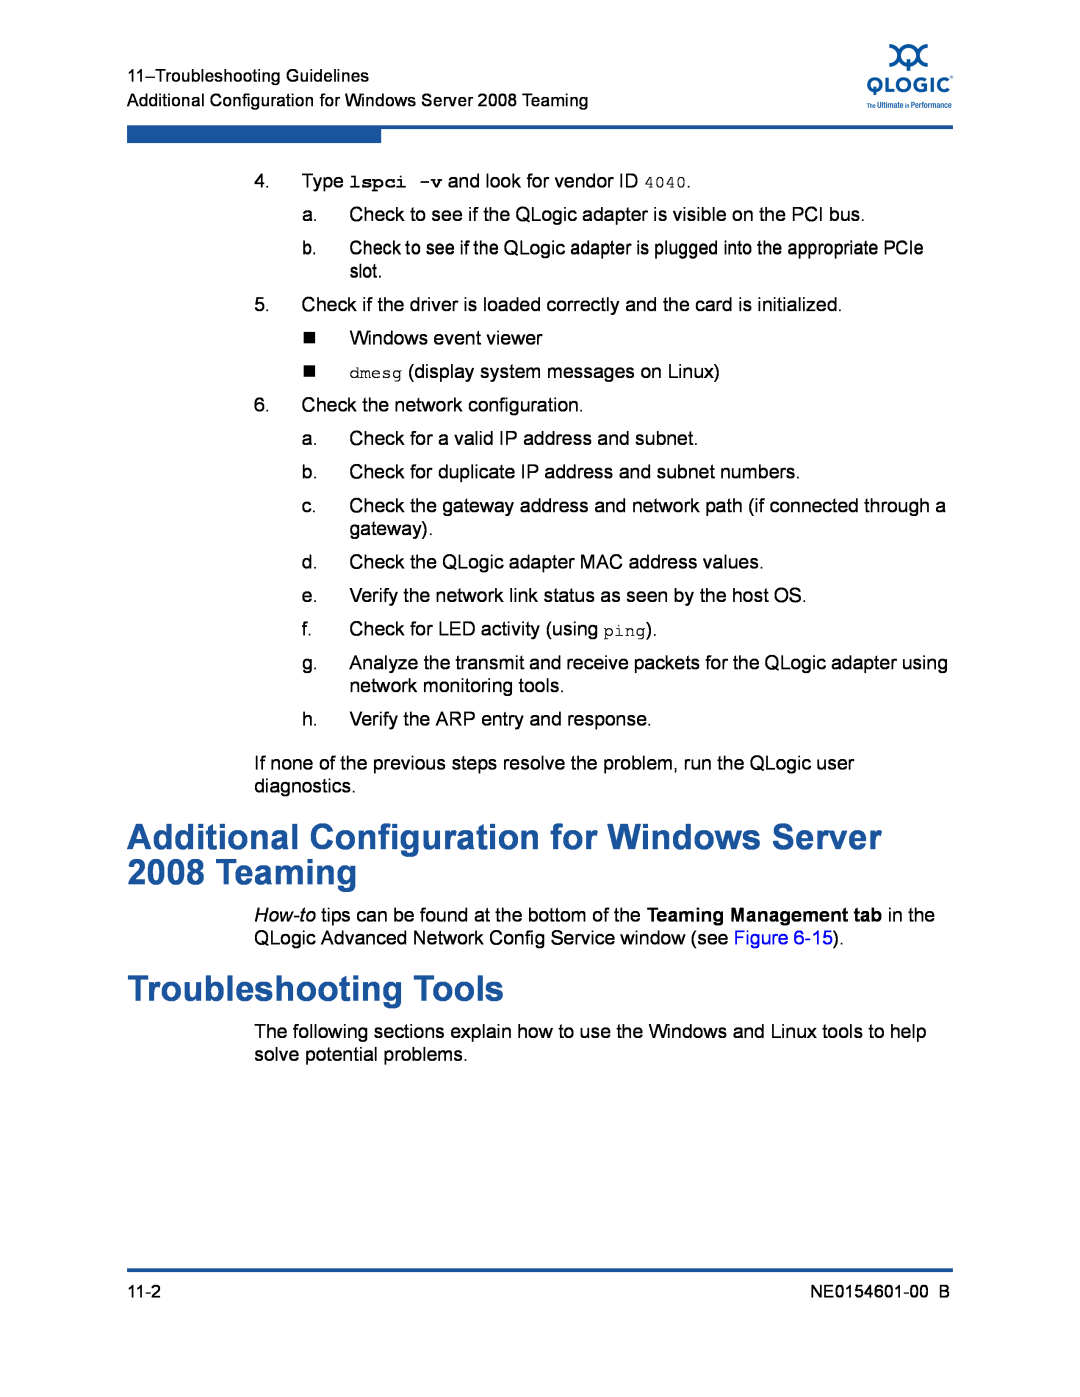 Q-Logic 3100, 3000 manual Additional Configuration for Windows Server 2008 Teaming, Troubleshooting Tools 